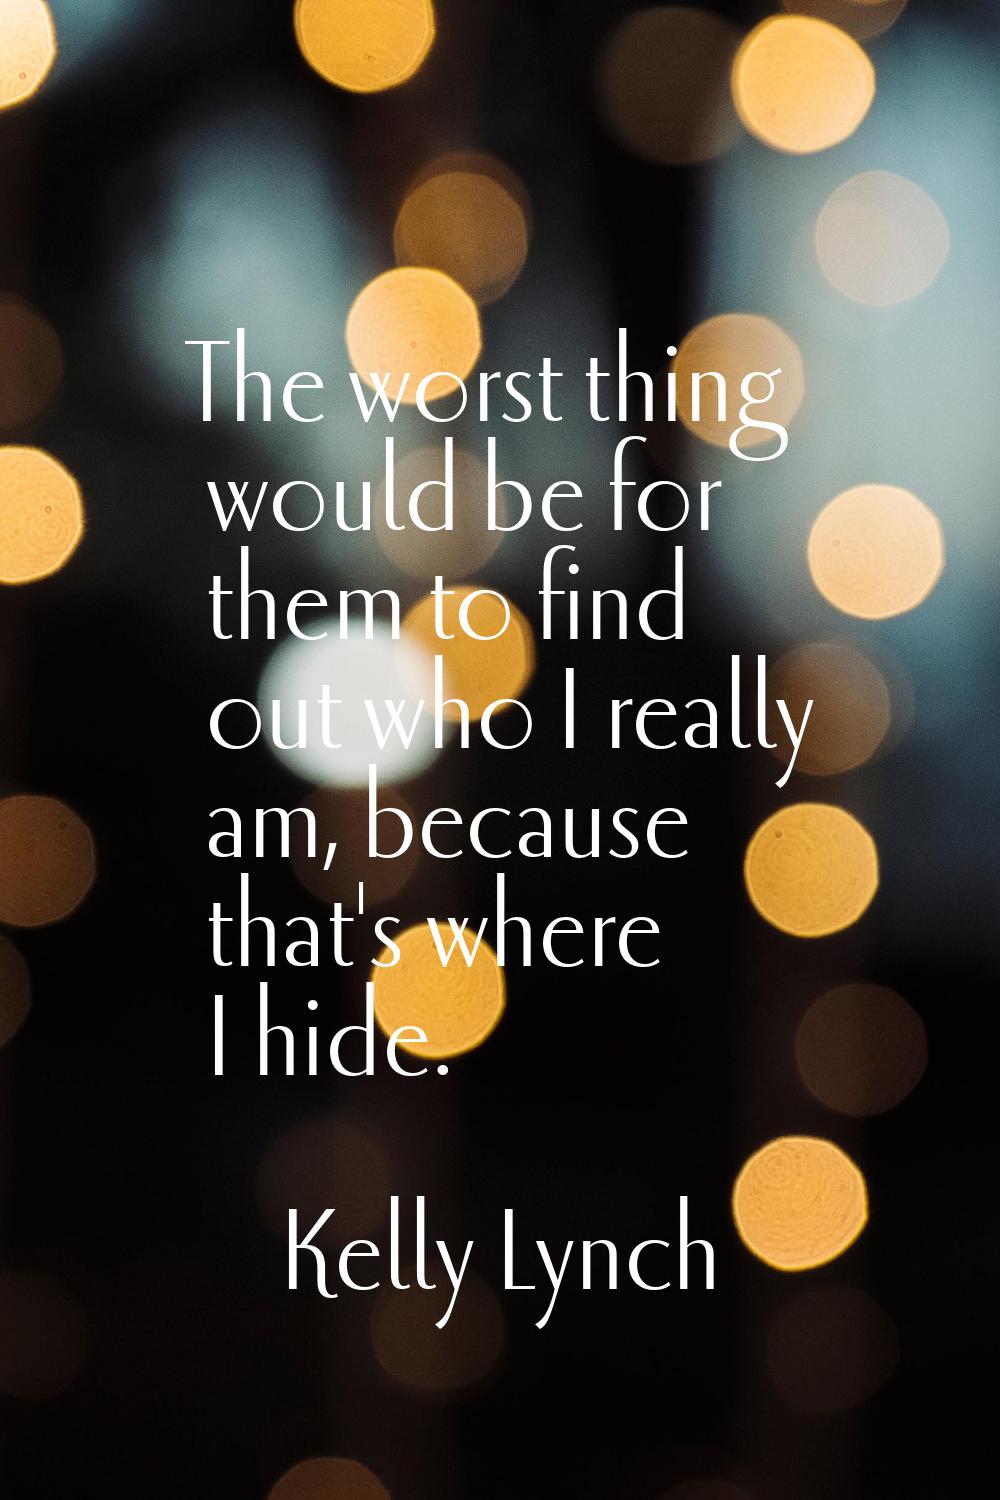 The worst thing would be for them to find out who I really am, because that's where I hide.